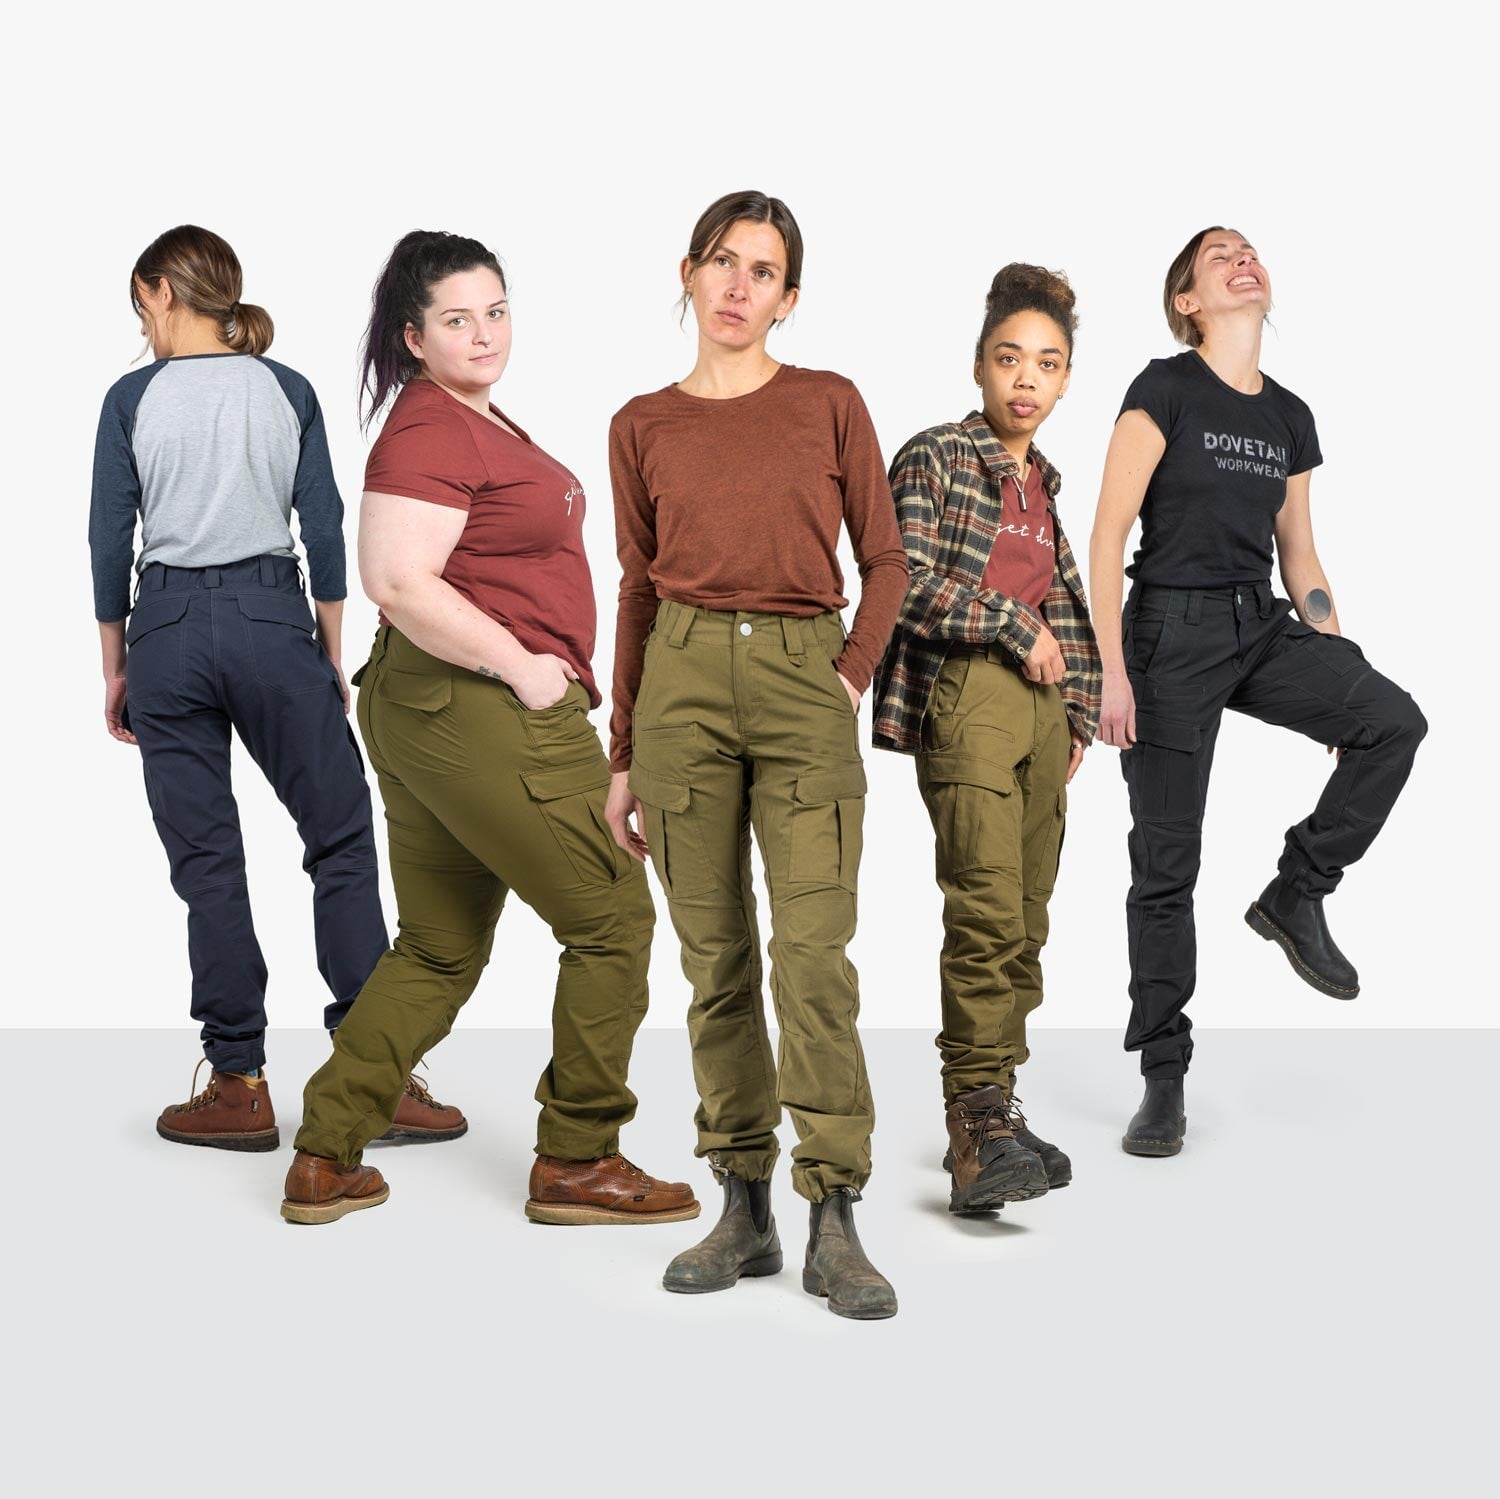 The 12 Best Double Knee Pants for Work & Everyday Wear – Dovetail Workwear